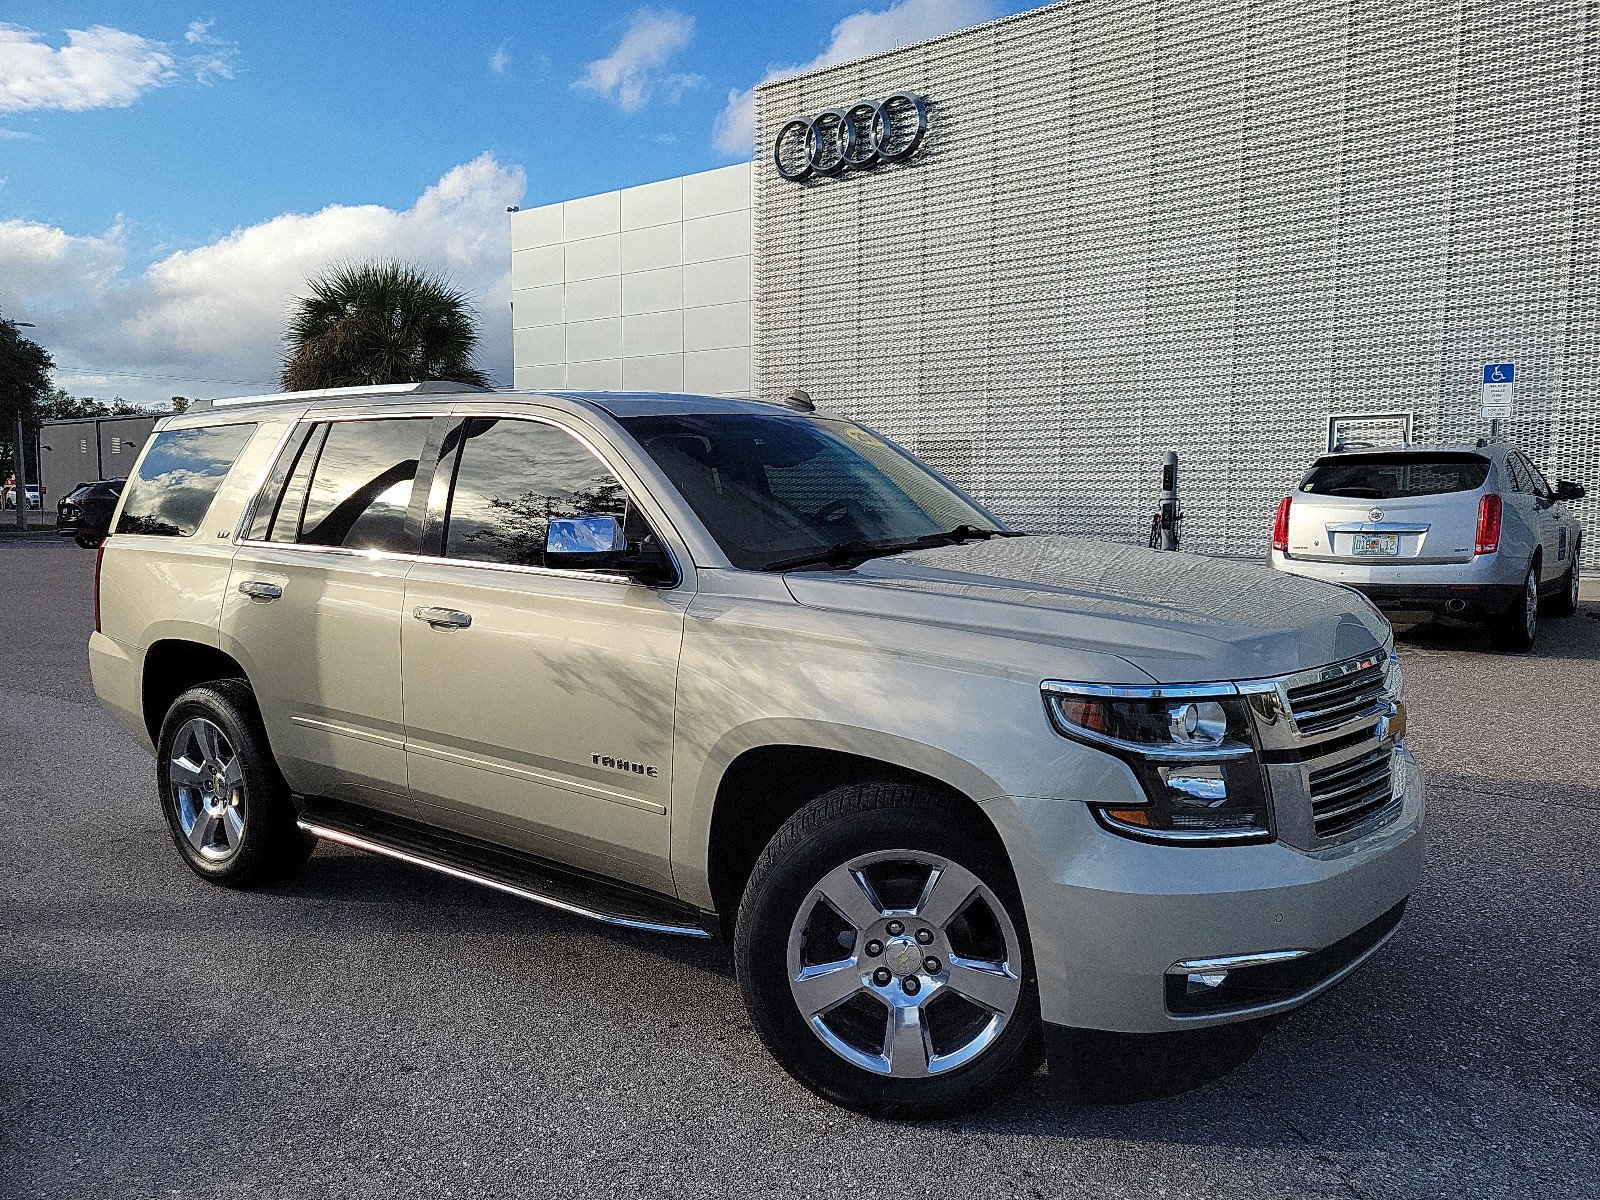 Used Chevrolet Tahoe for Sale Right Now in Plant City, FL - Autotrader